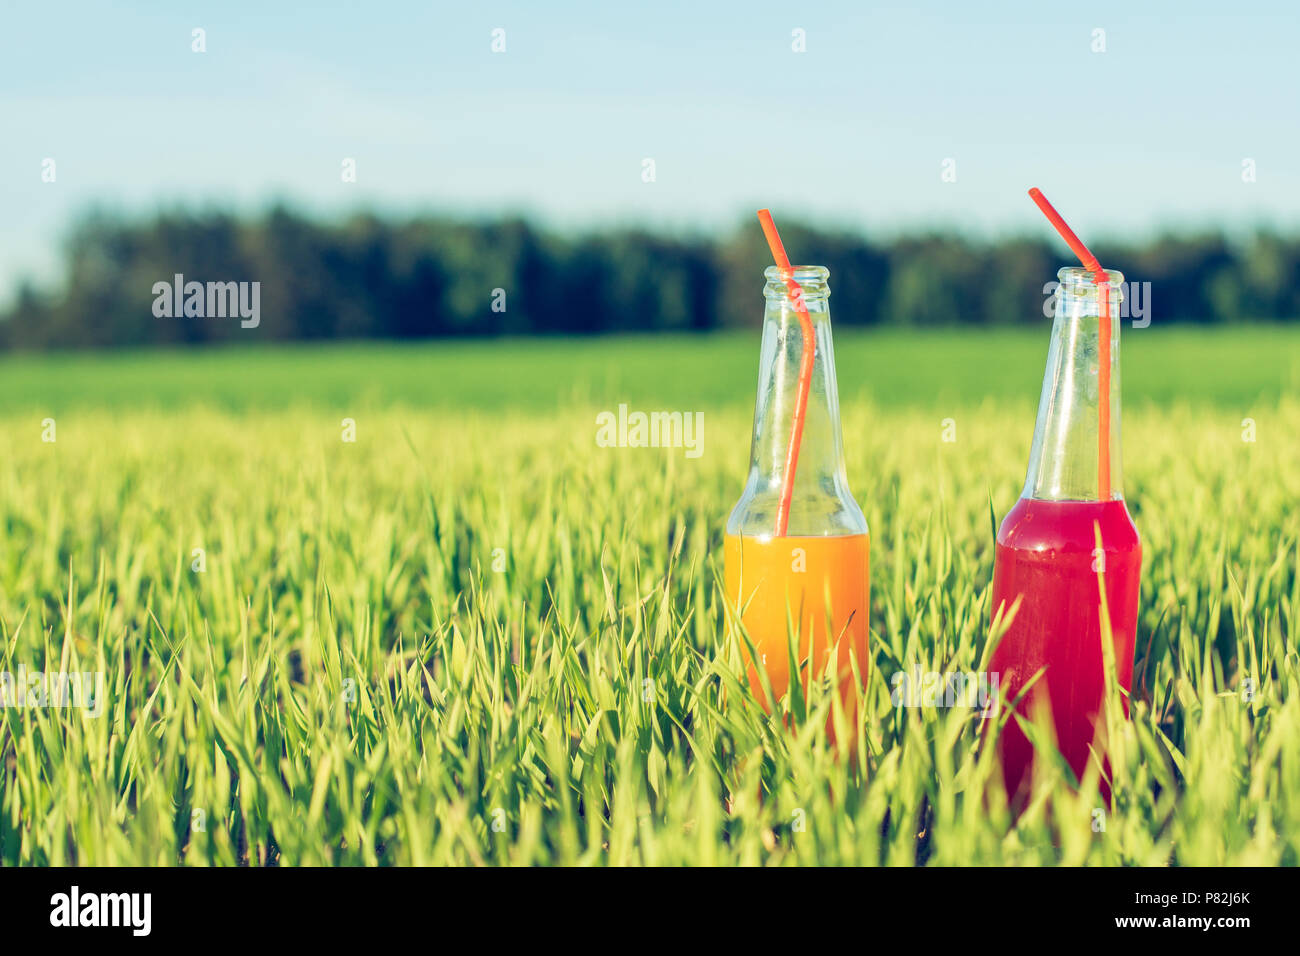 Summer party fresh beverage alcoholic Coctails red and orange in bottles standing in summer grass with straw Stock Photo